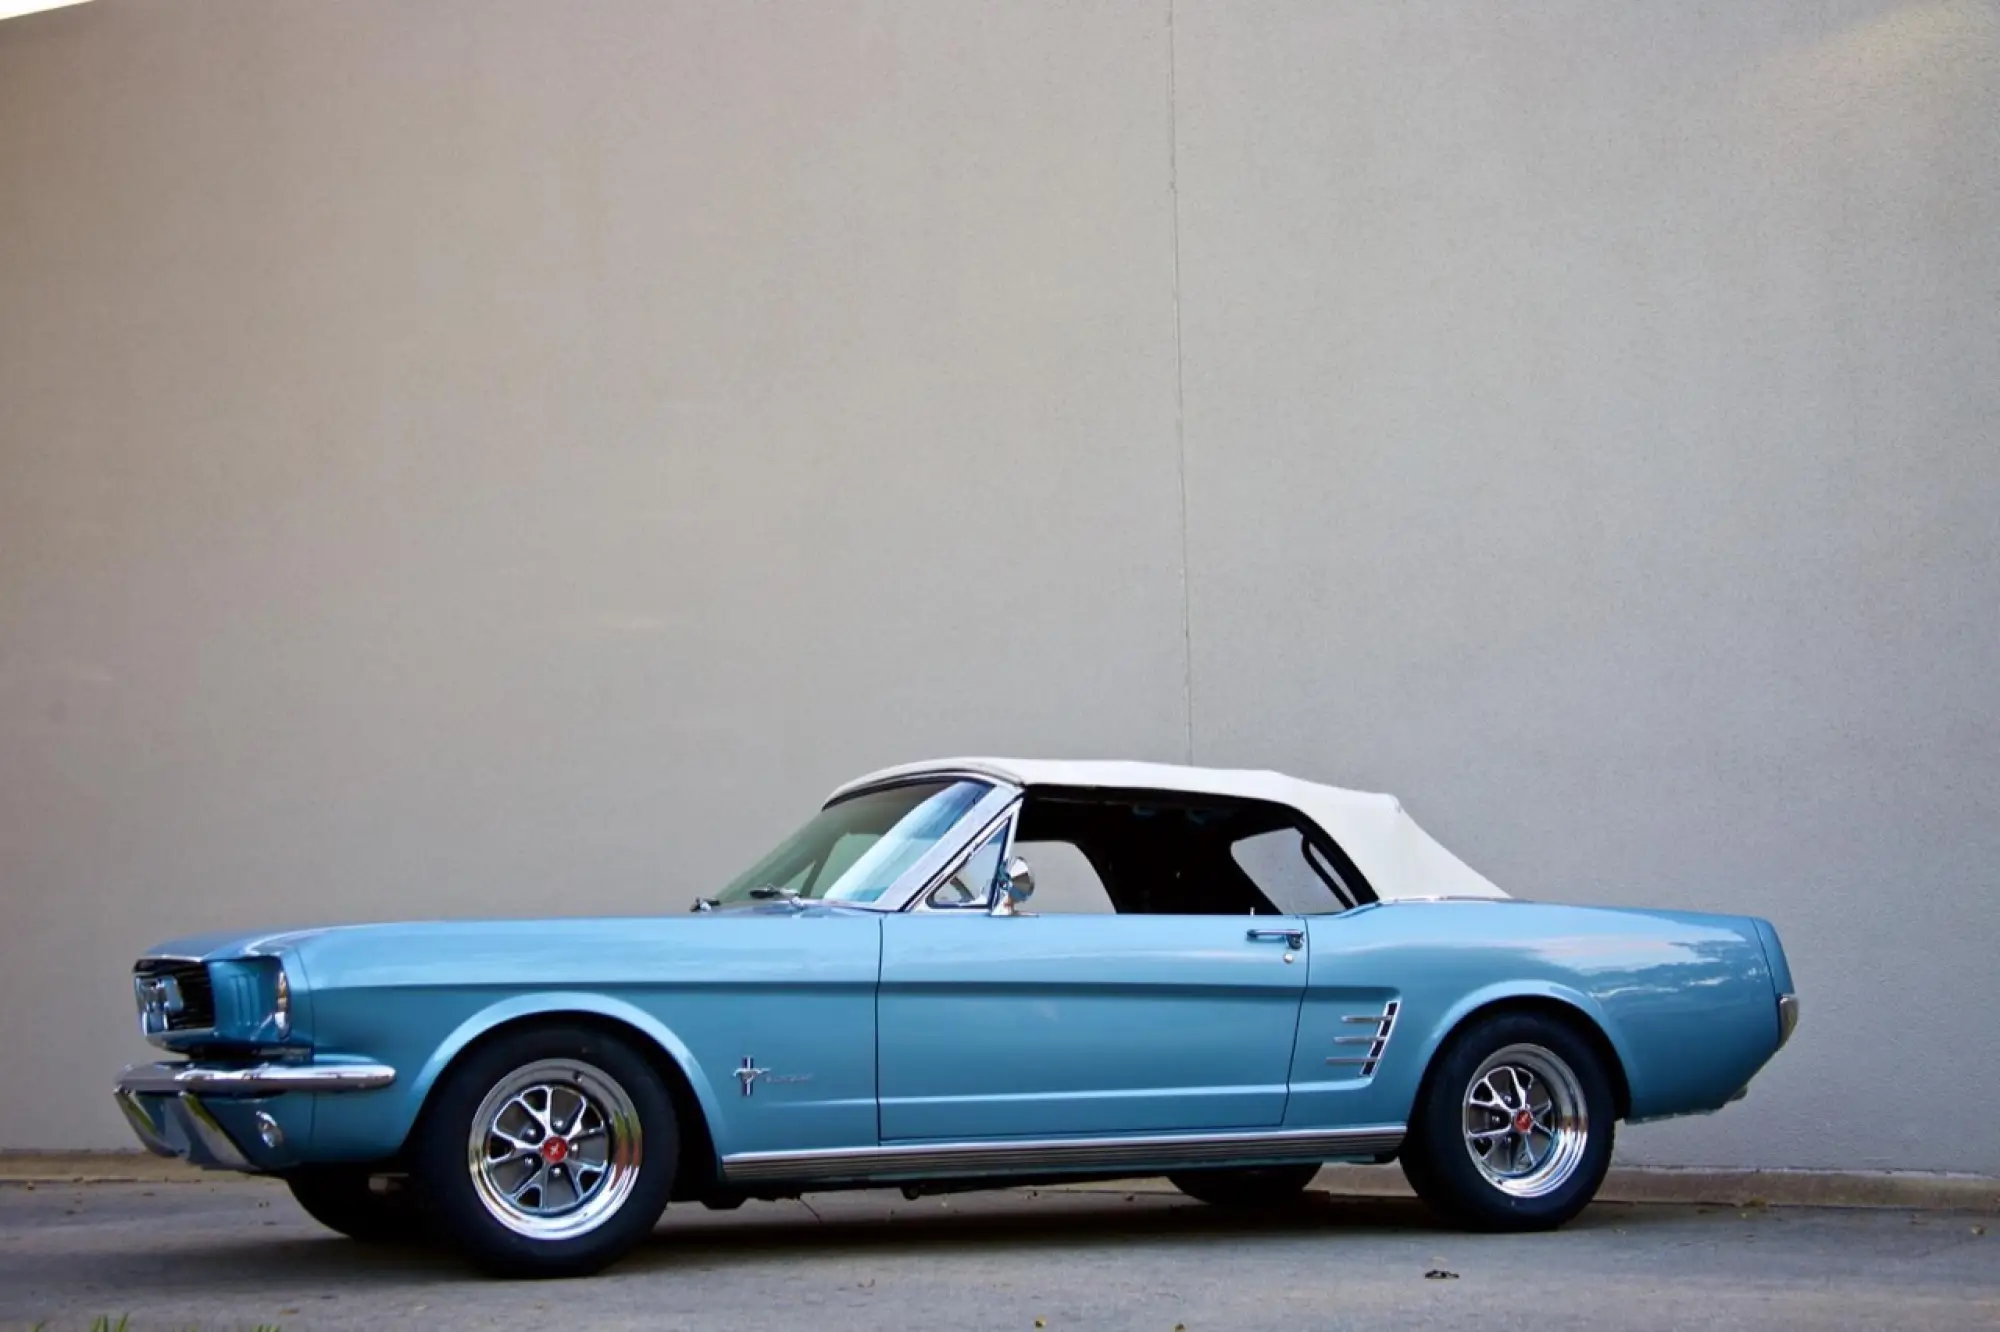 Ford Mustang classic by Revology Cars - 11